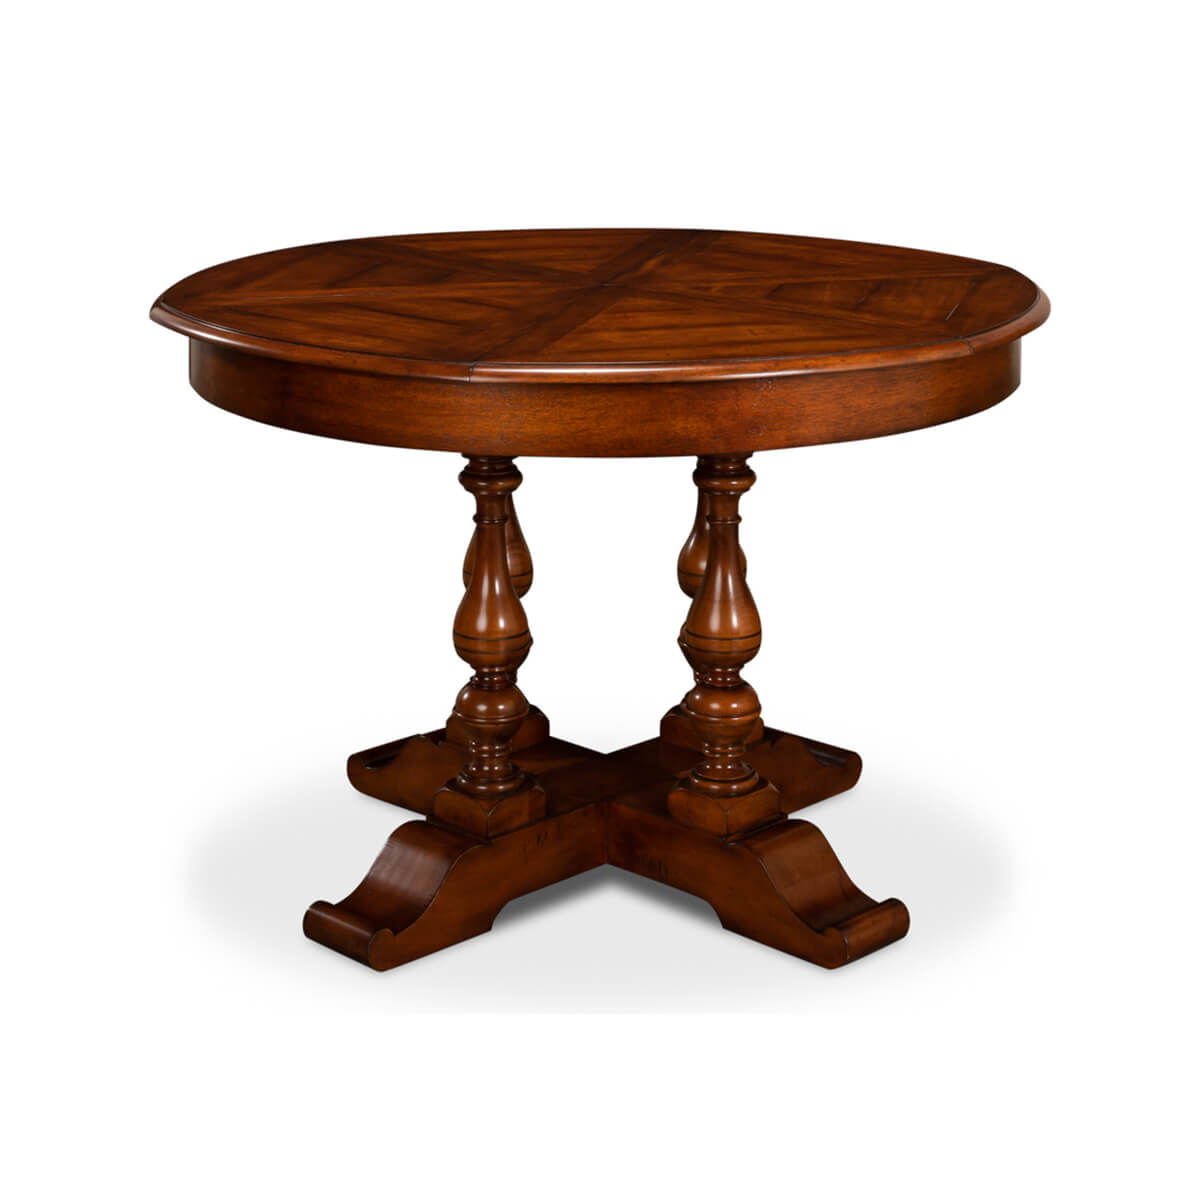 Early English Style Round Extension Dining Table, 56" - English Georgian America